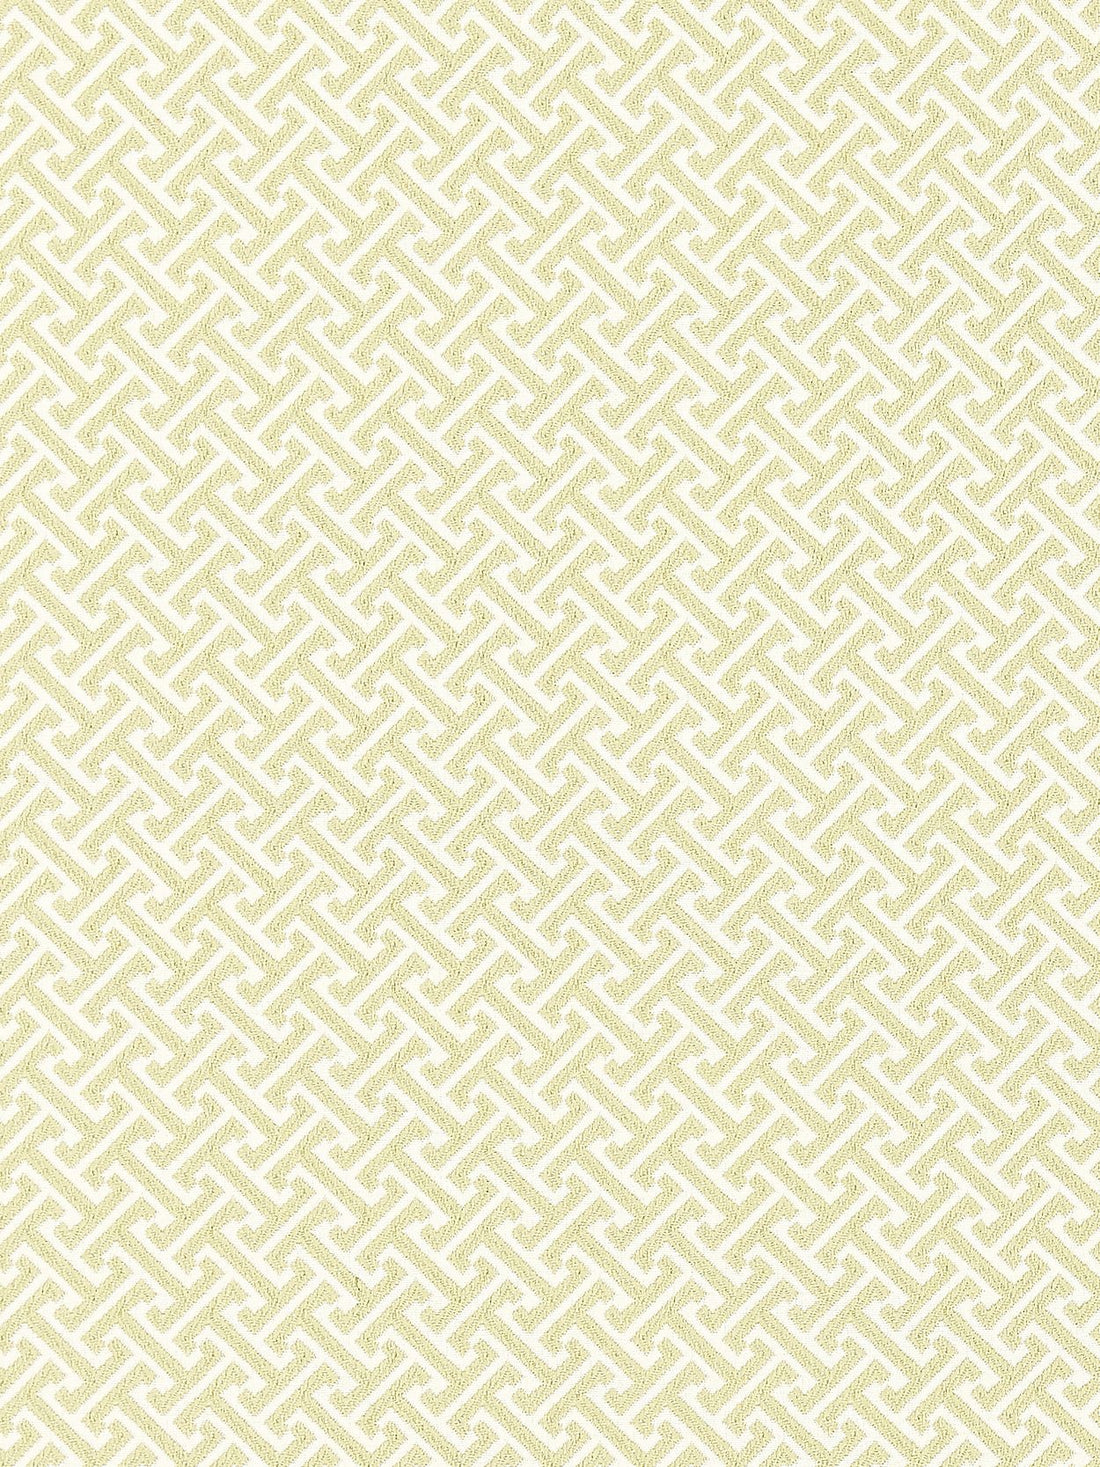 Mandarin Weave fabric in celadon color - pattern number SC 000127102 - by Scalamandre in the Scalamandre Fabrics Book 1 collection